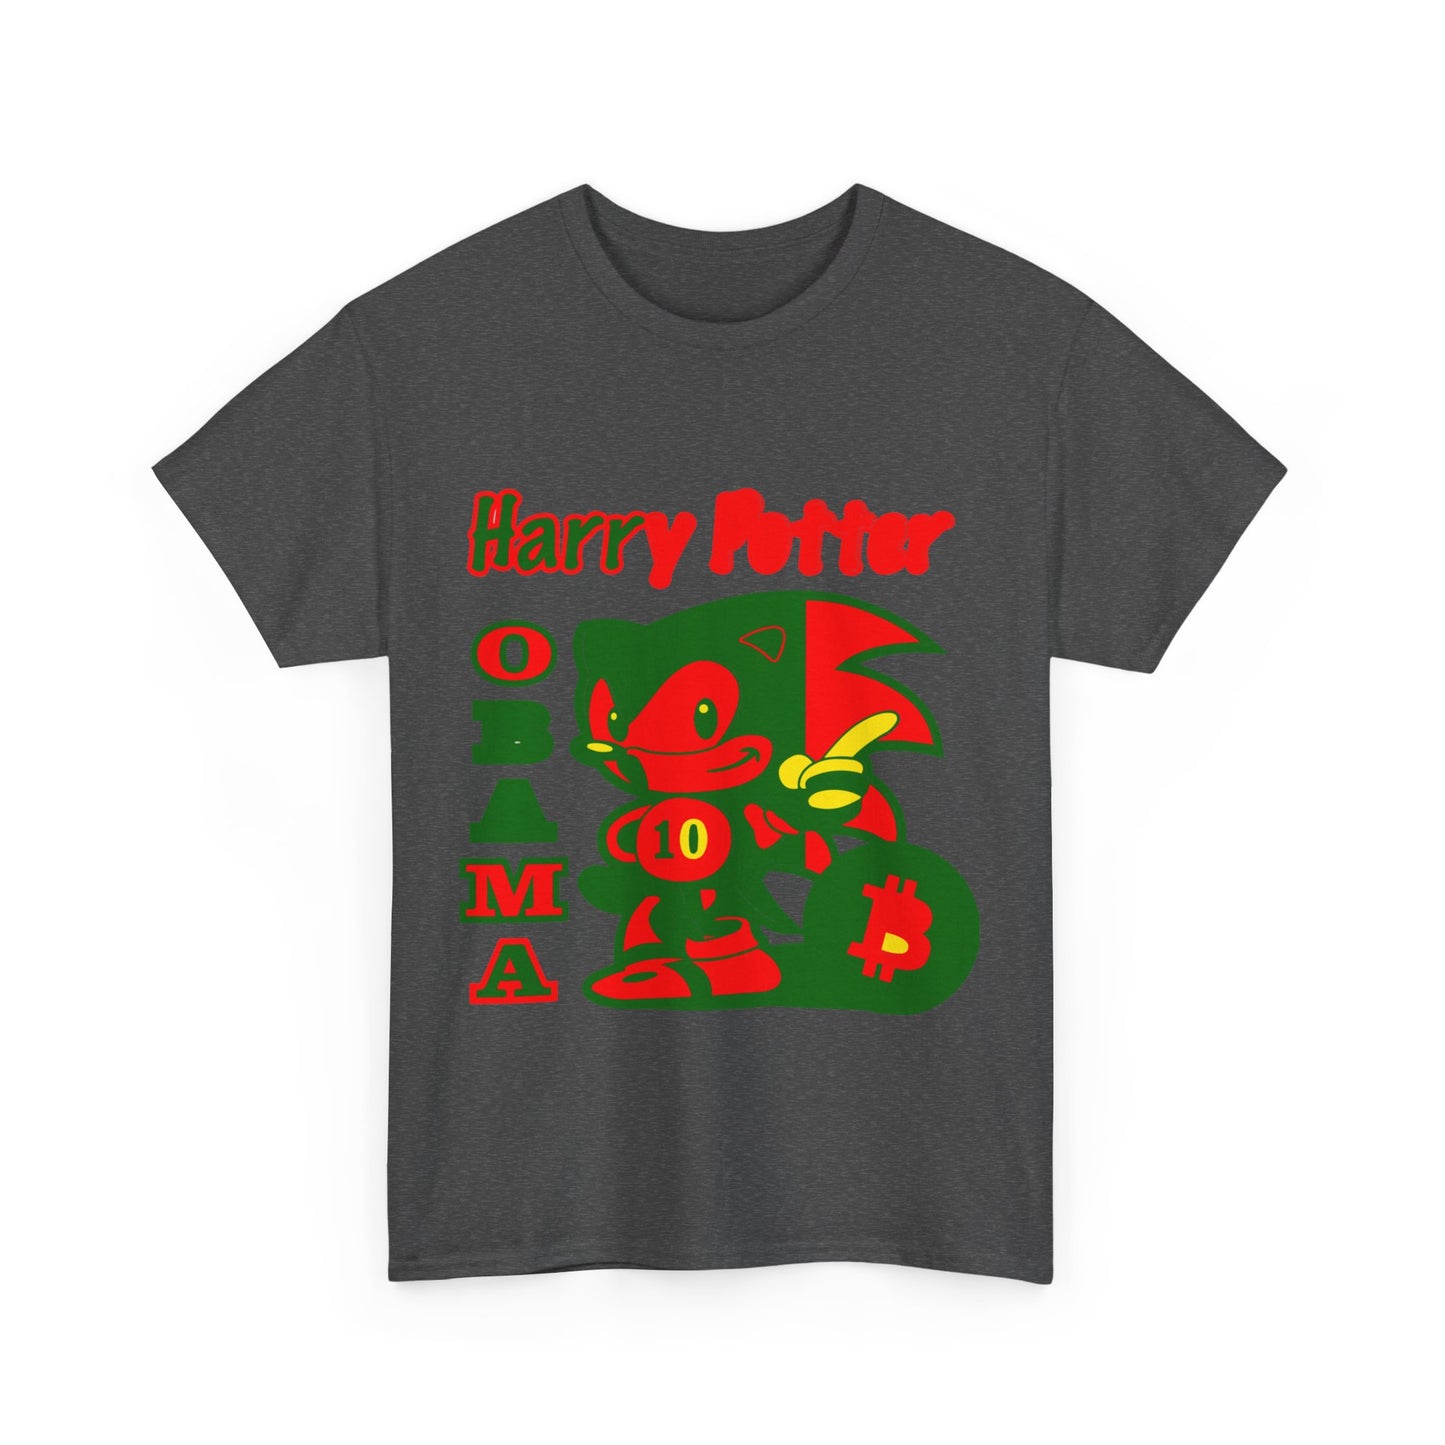 LIMITED EDITION PORTUGUESE STYLE T SHIRT